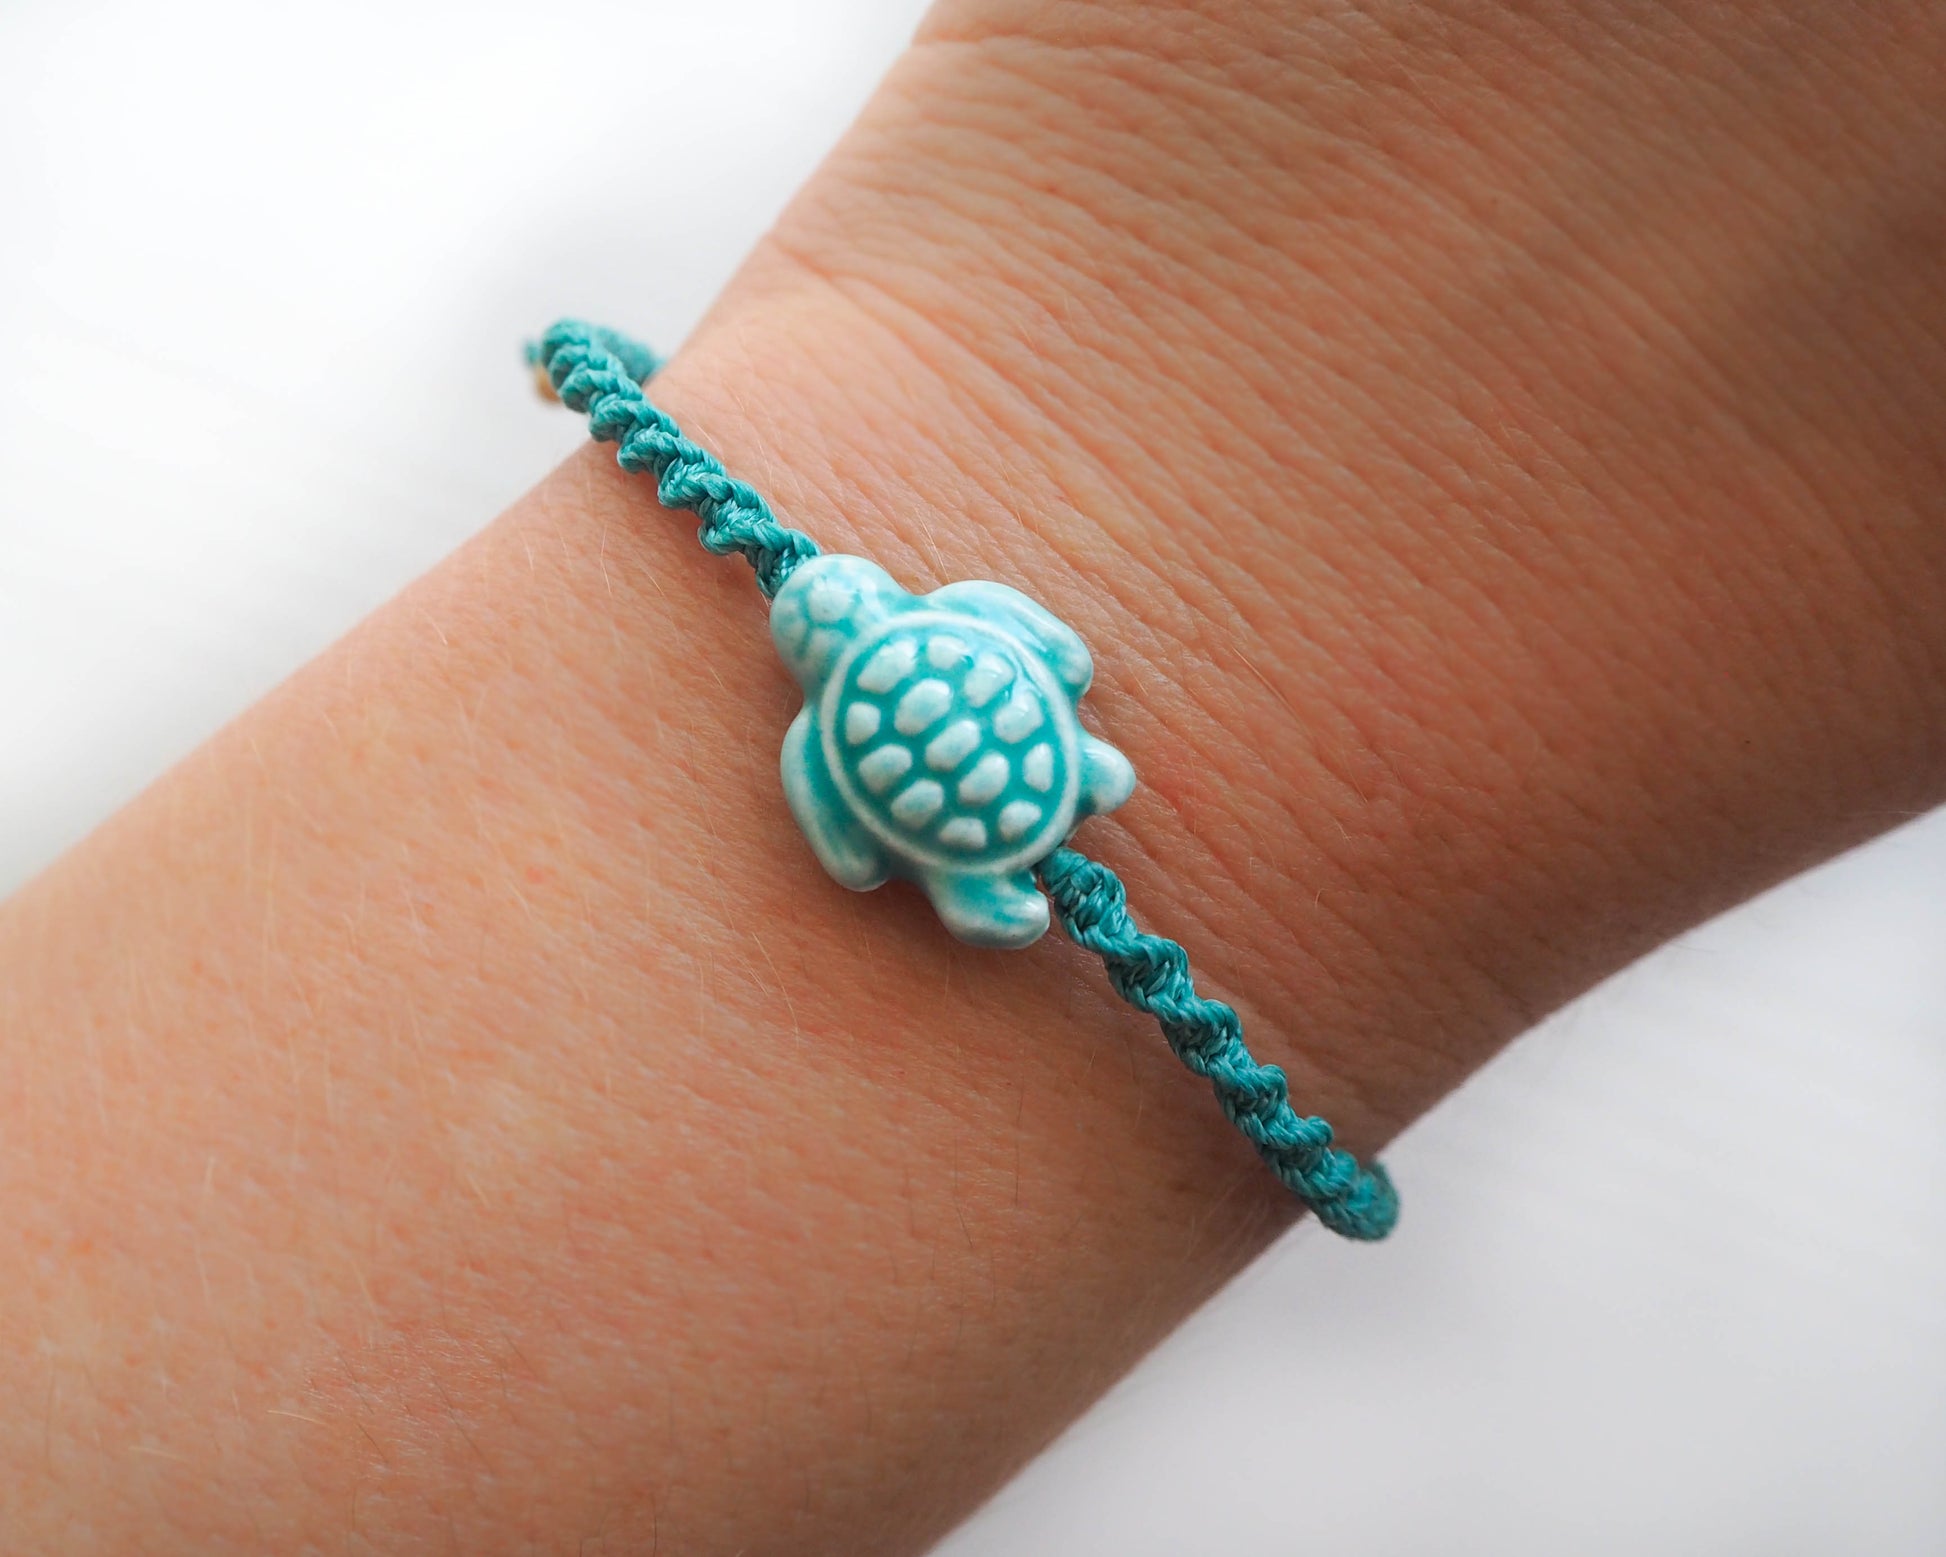 A photo displaying the entire Turquoise Green Ceramic Turtle Braided Bracelet, elegantly worn on a wrist. The bracelet adds a touch of nature-inspired sophistication to the outfit, handmade coastal jewelry, tartaruga, ocean inspired 